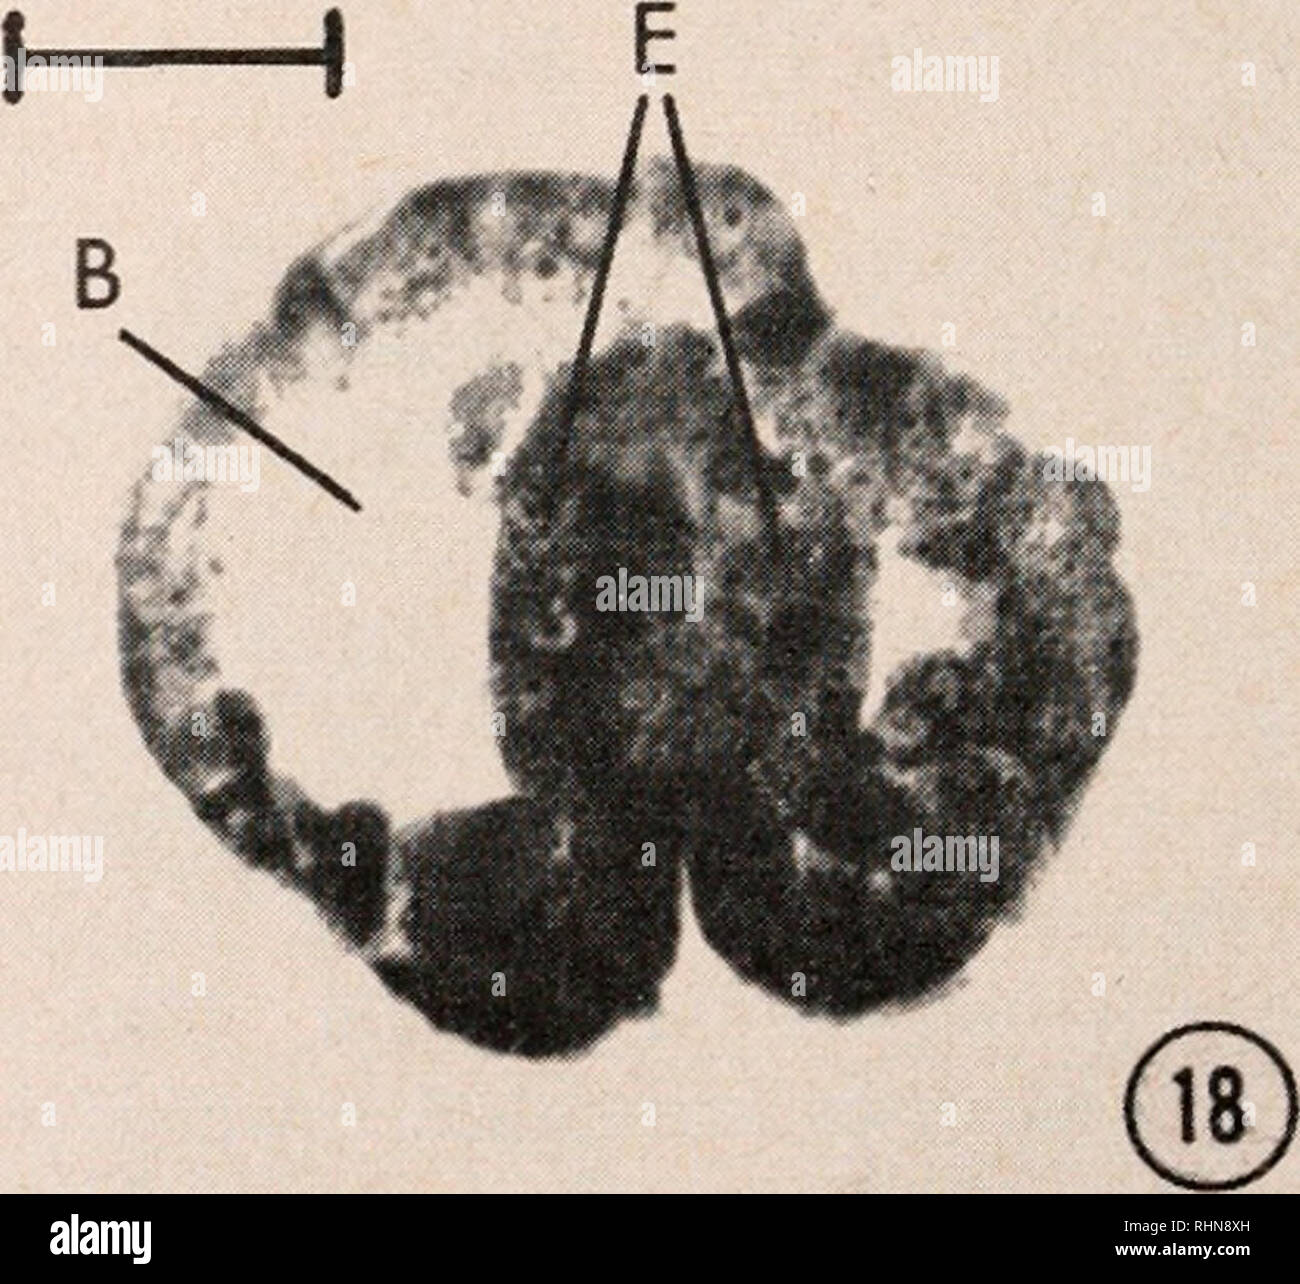 . The Biological bulletin. Biology; Zoology; Biology; Marine Biology. FIGURE 13. Section of a normal 1-day old embryo. FIGURE 14. Sagittal section of an abnormal 1-day-old embryo treated the first 24 hours with 4 X 1CT' M CoCL. FIGURE 15. Sagittal section of a normal 2-day-old embryo. FIGURE 16. Sagittal section of an abnormal 2-day-old embryo treated the first 24 hours with 4 X 1(T5 M CoCL. FIGURE 17. Sagittal section of a normal 3-day-old embryo. FIGURE 18. Sagittal section of an abnormal 3-day-old embryo treated the first 24 hours with 4 X lO'8 M CoClo. Key for Figures 13 to 18. B, blastoco Stock Photo